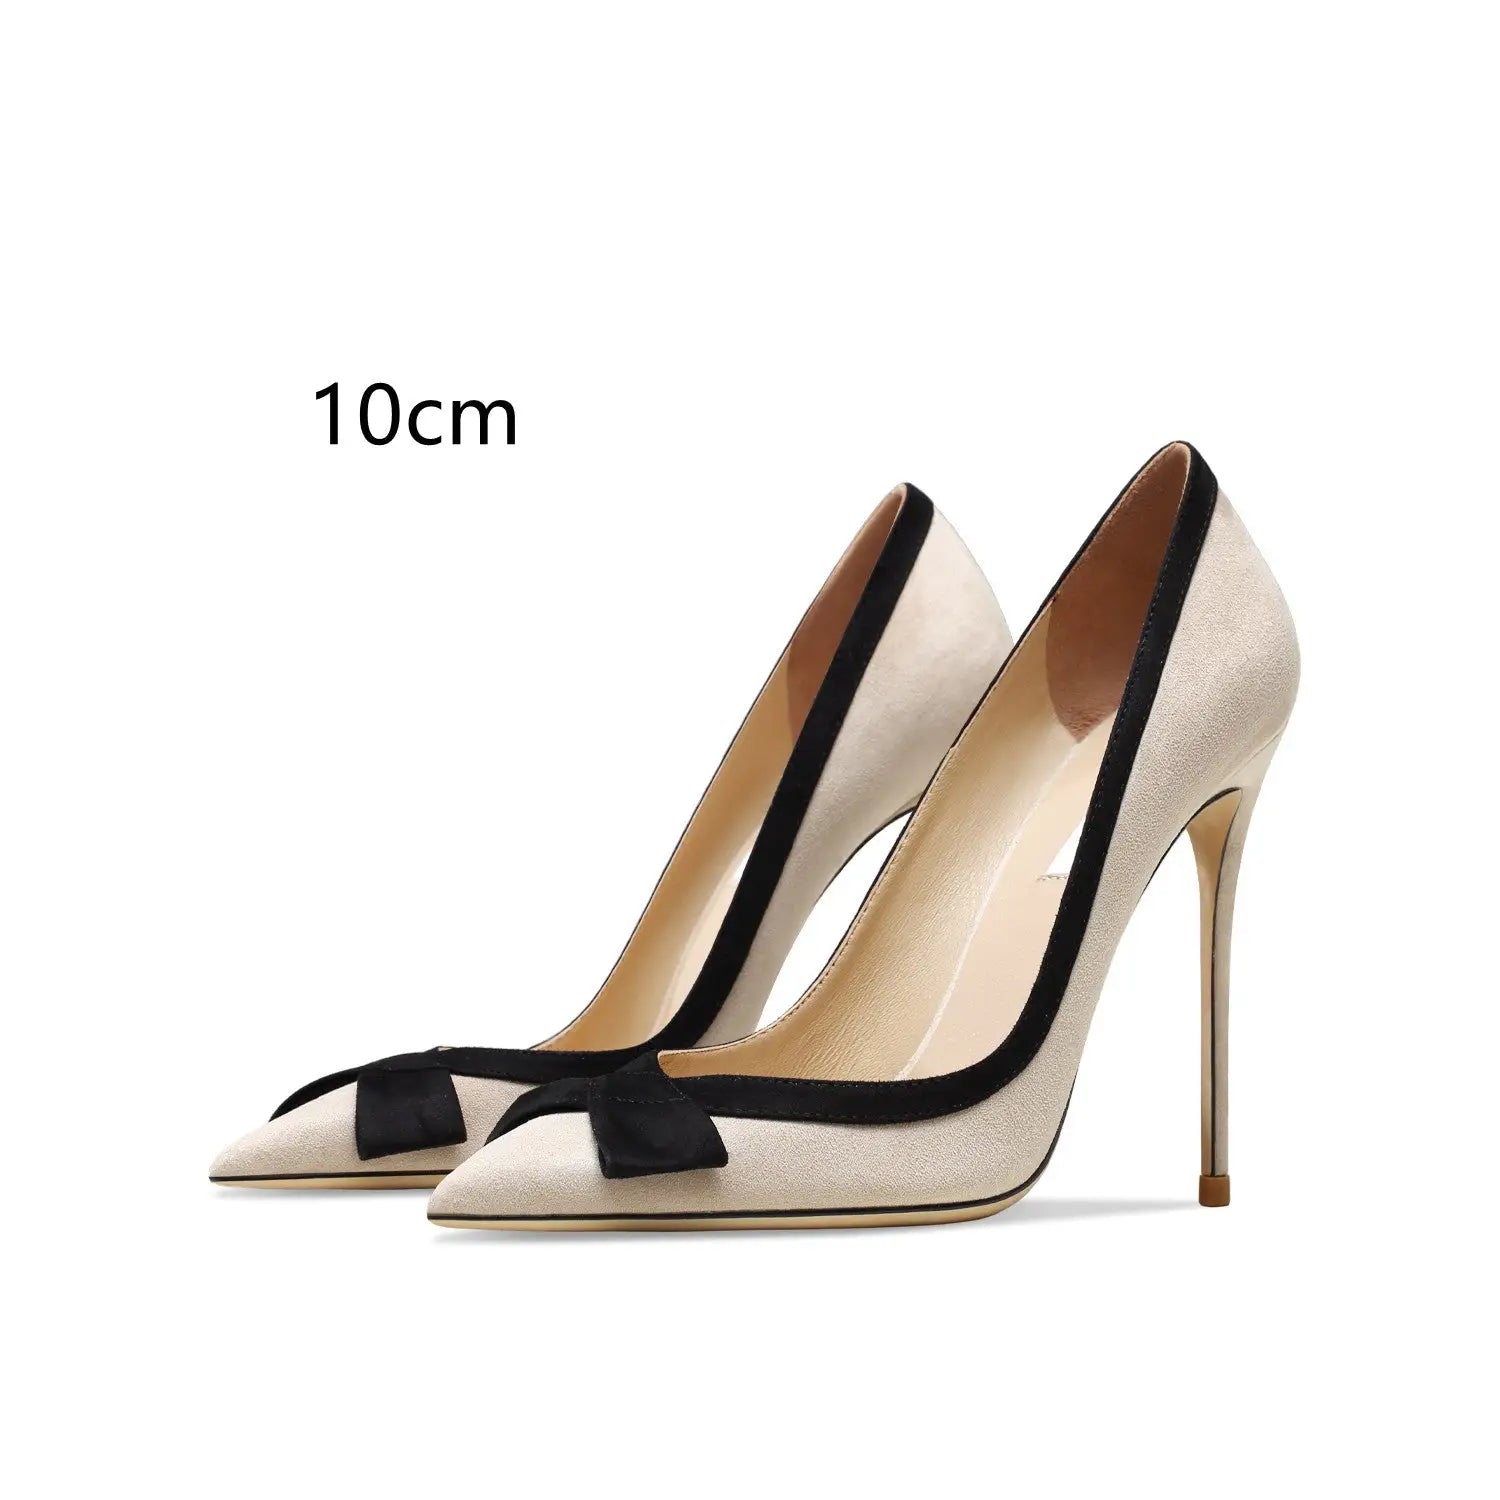 Perfect leather stiletto high heels - apricot / cashmere